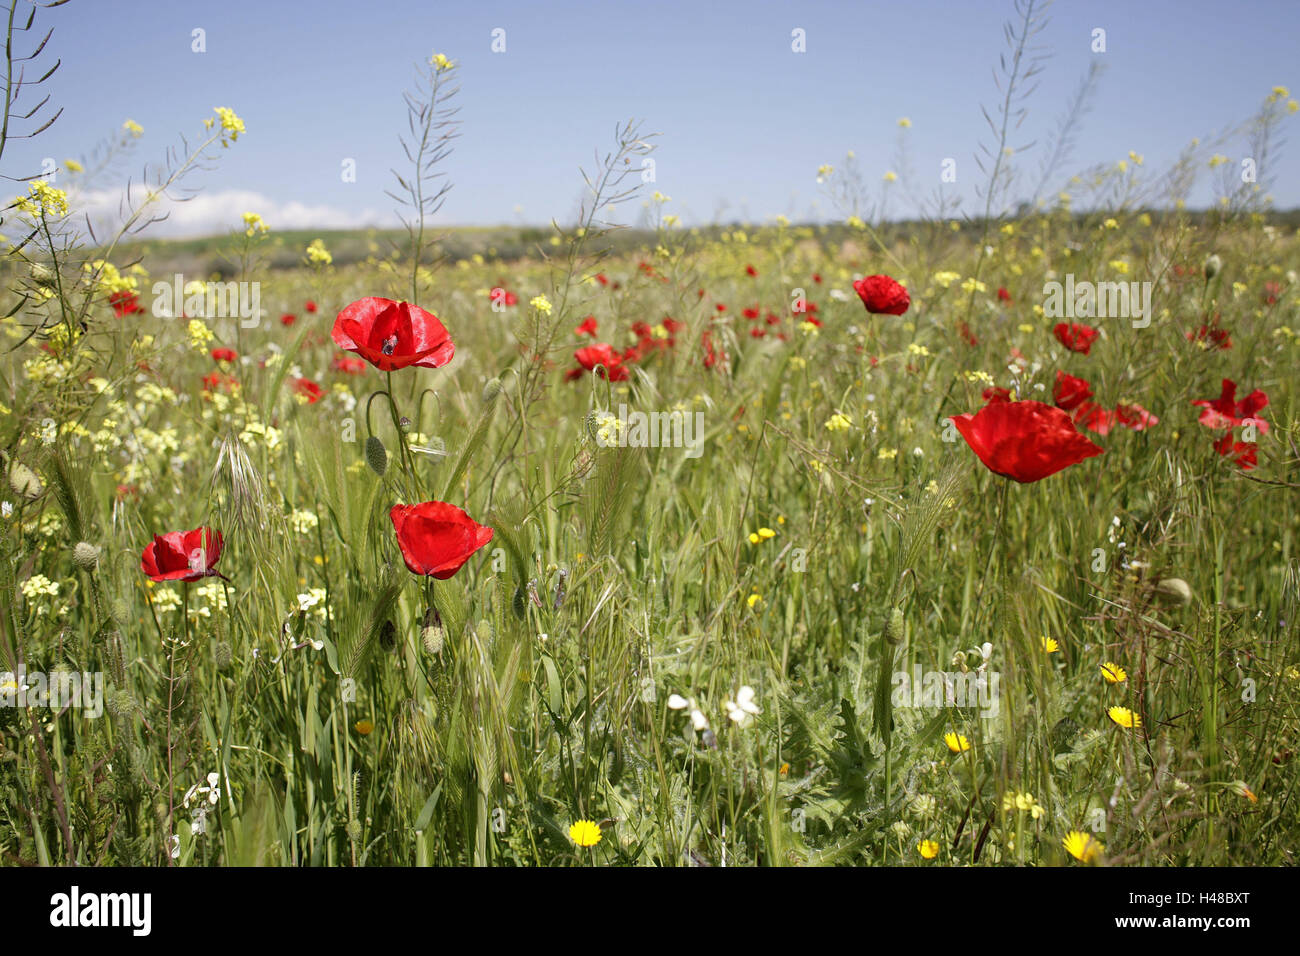 Spain, meadow, spring, nature, trees, spring meadow, wild flower meadow, wild flowers, flower meadow, flowers, poppies, clap poppy seed, blossom, grass, season, springlike, nobody, nature, scenery, Stock Photo